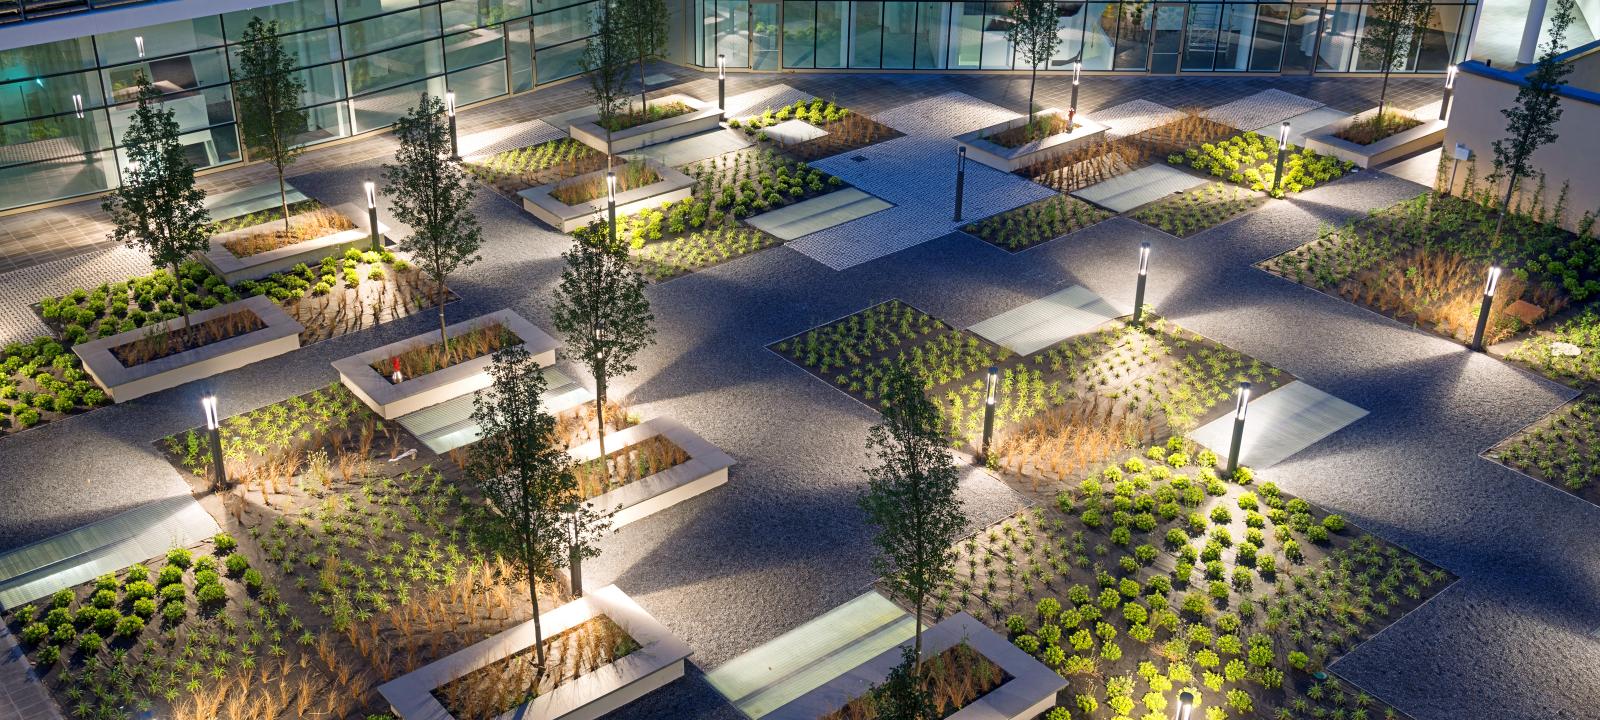 Illuminated courtyard with Sedum plant beds and small trees at night